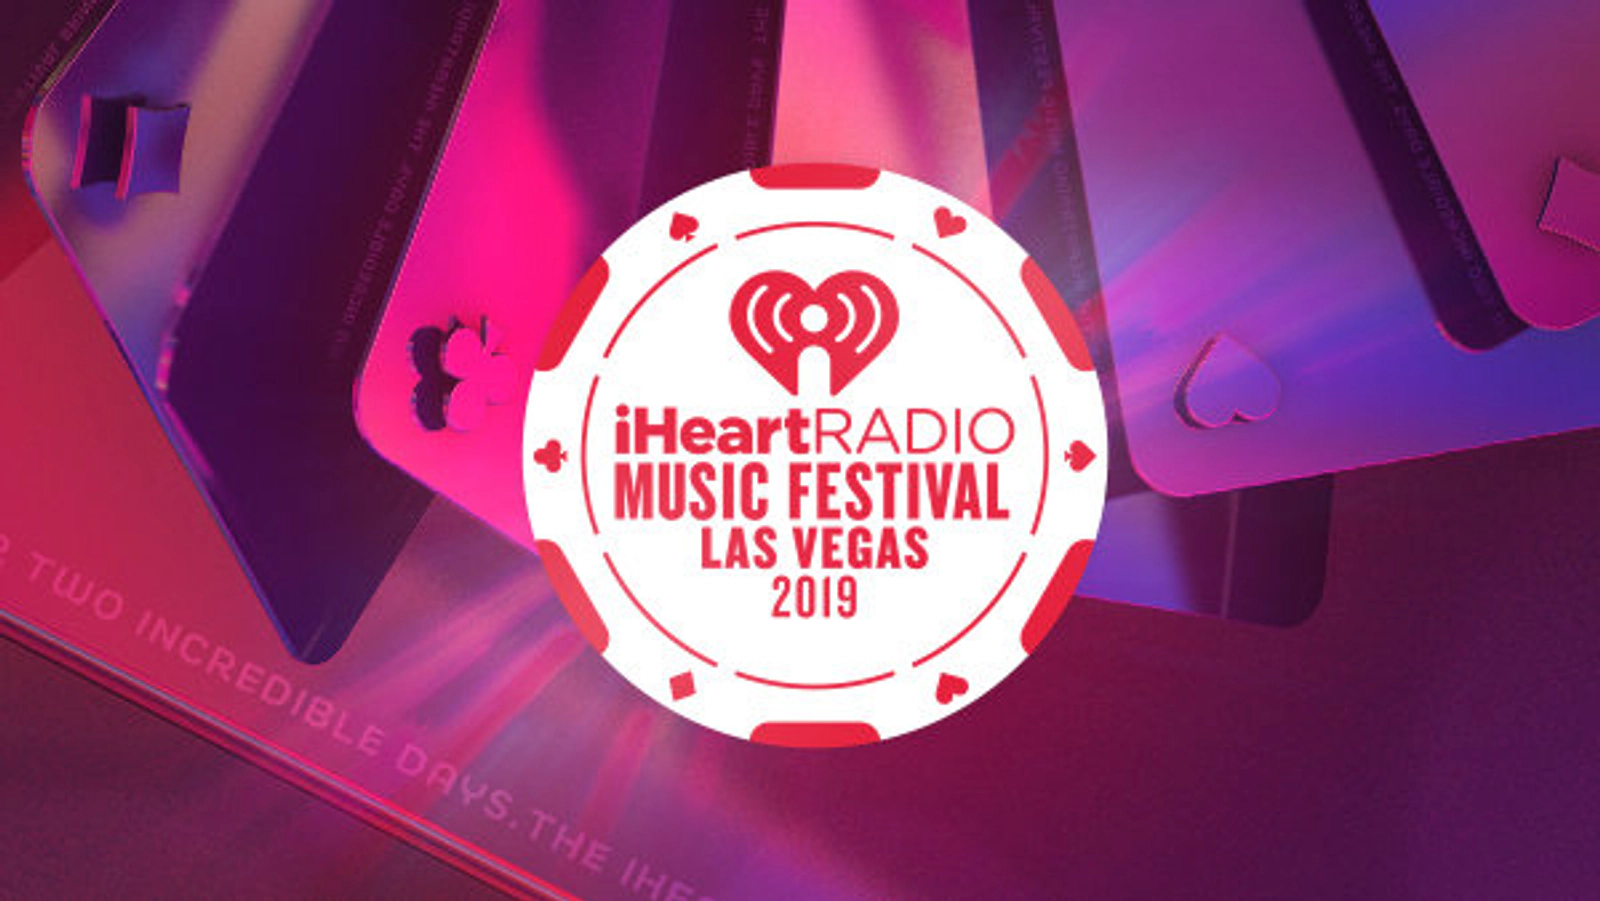 Tell Alexa To Play The iHeartRadio Music Festival Station And You Could WIN Your Way To Vegas! - Thumbnail Image